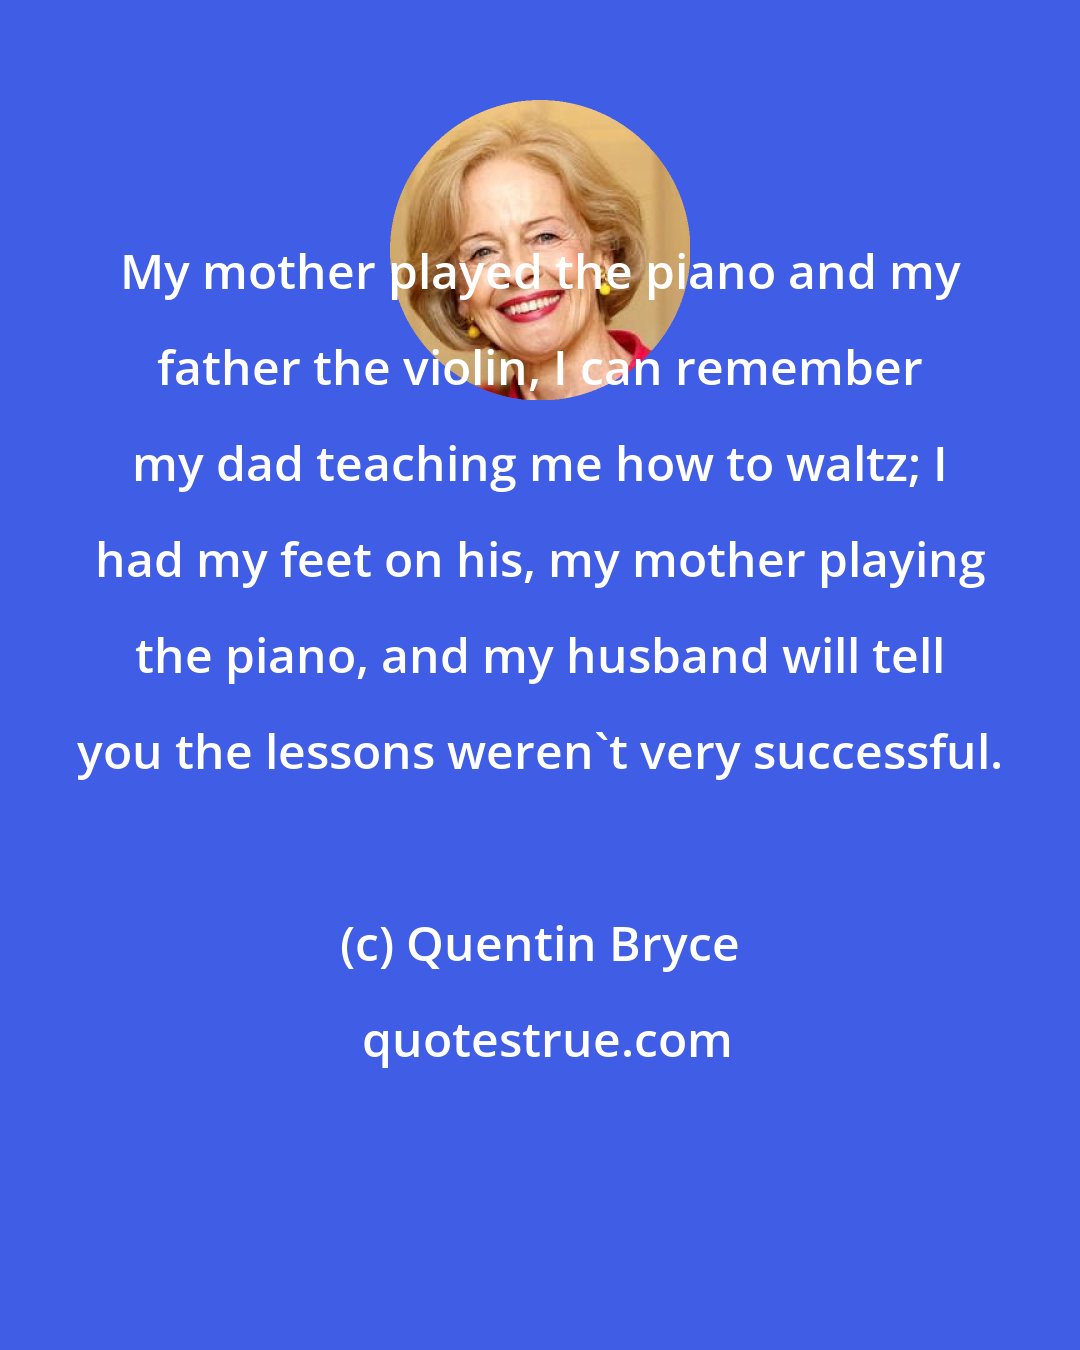 Quentin Bryce: My mother played the piano and my father the violin, I can remember my dad teaching me how to waltz; I had my feet on his, my mother playing the piano, and my husband will tell you the lessons weren't very successful.